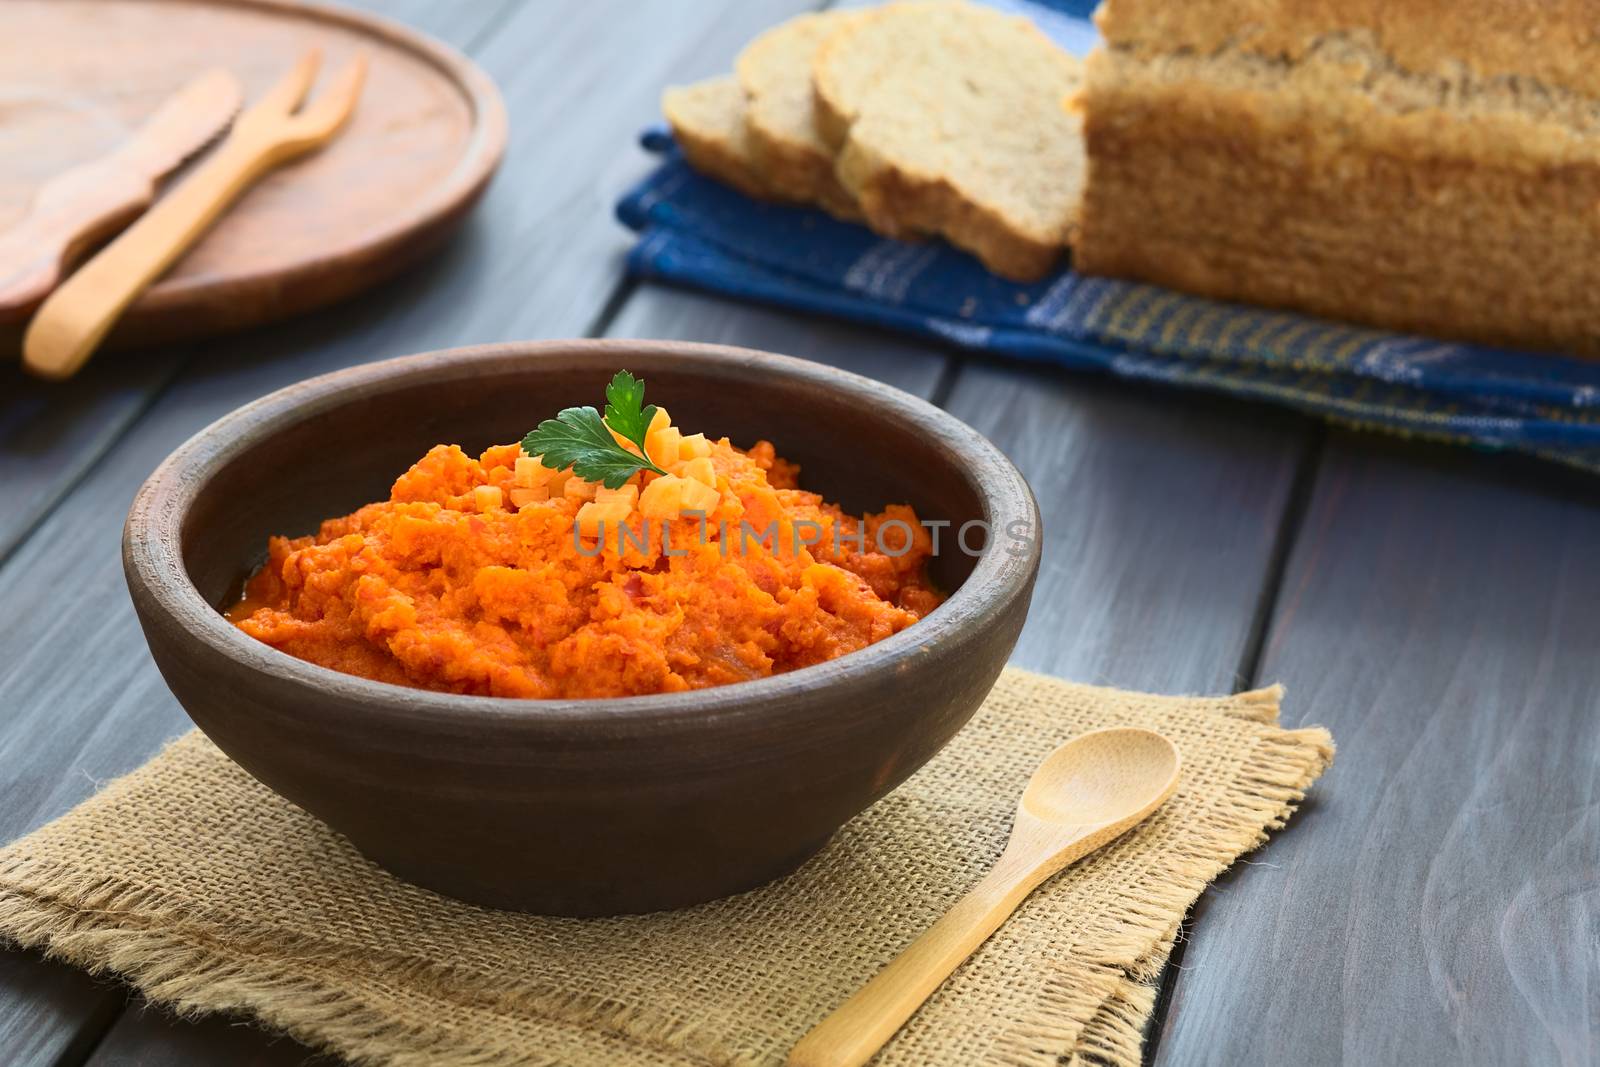 Carrot and red bell pepper spread in rustic bowl garnished with parsley leaf, wholegrain bread in the back, photographed with natural light (Selective Focus, Focus on the parsley leaf)